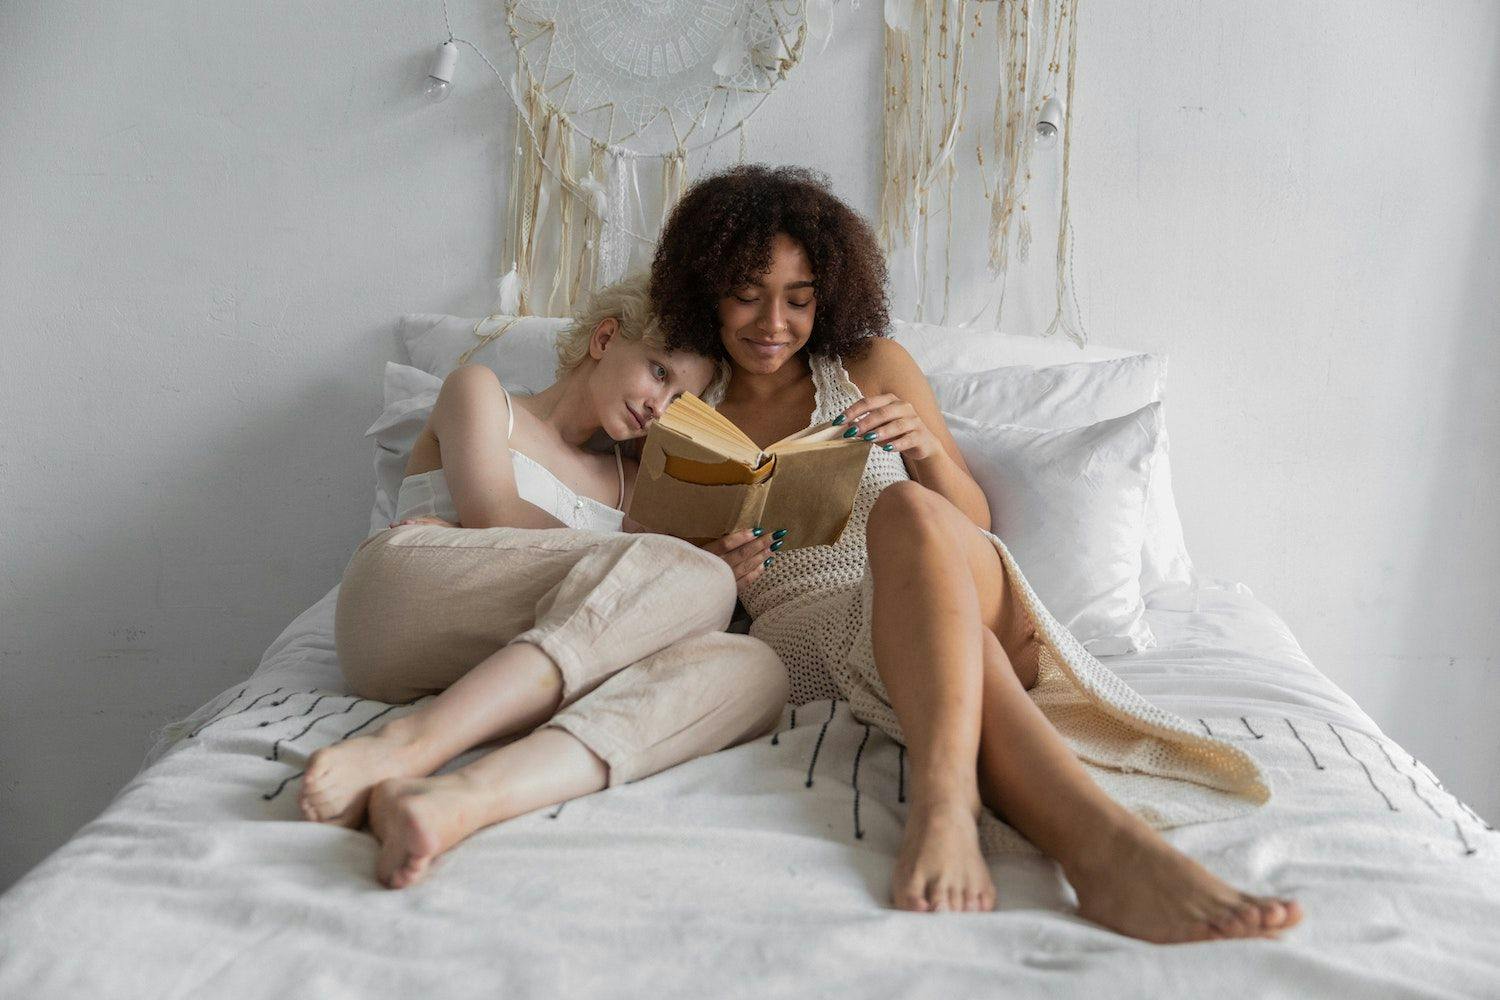 Reading relatable stories has positive effect on LGBTQ+ community